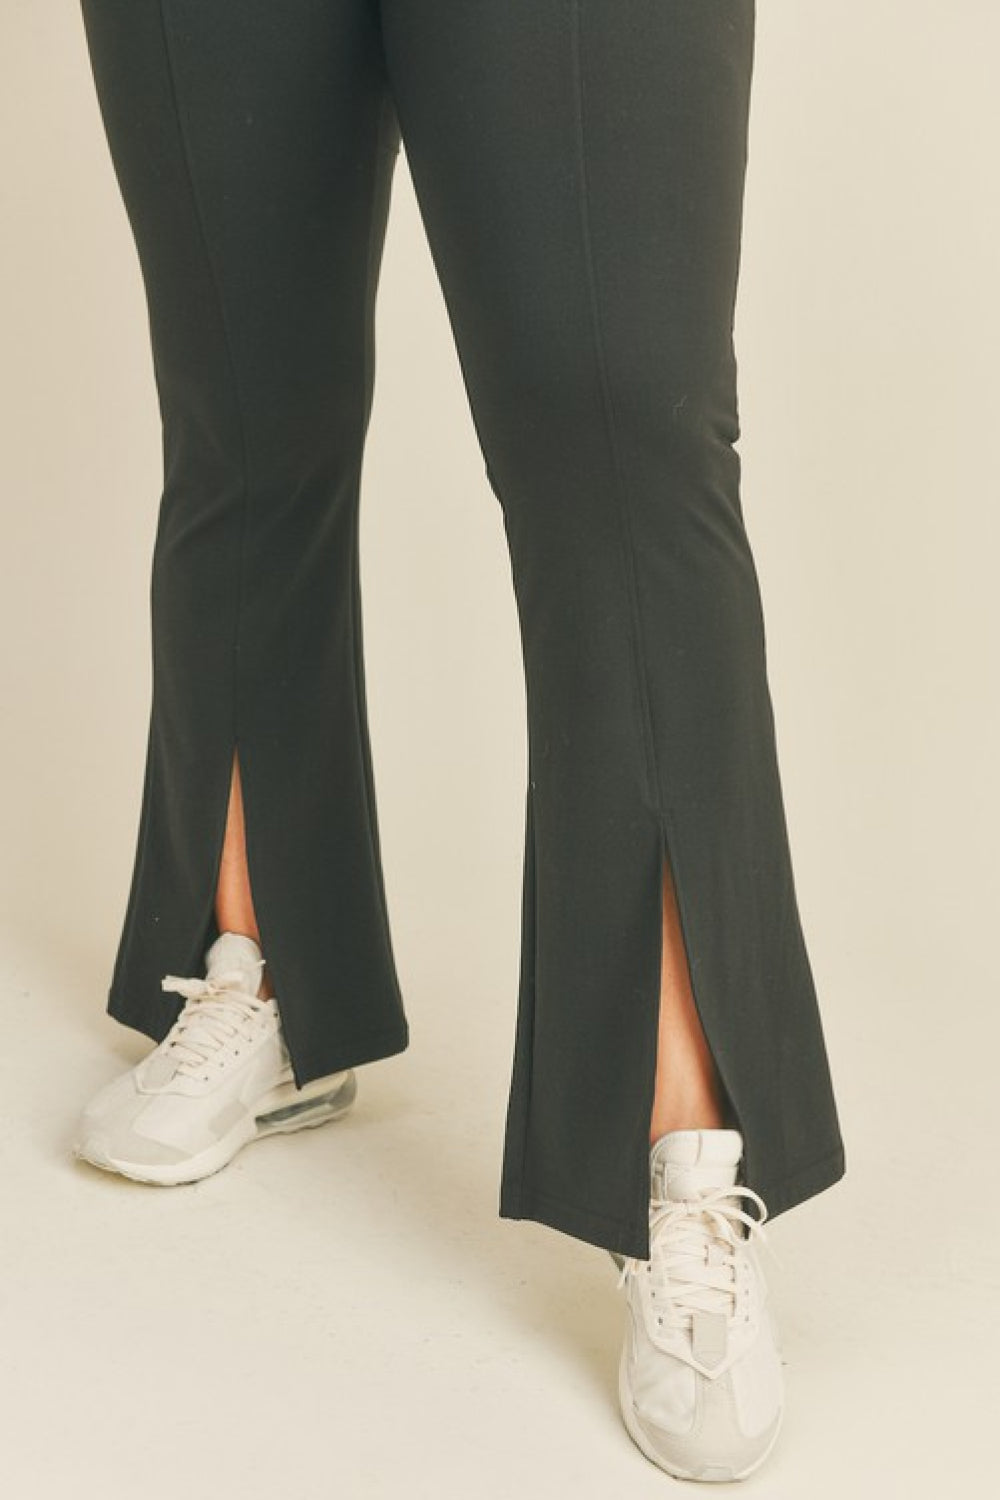 Kimberly C Slit Flare Leg Pants in Black  Southern Soul Collectives 